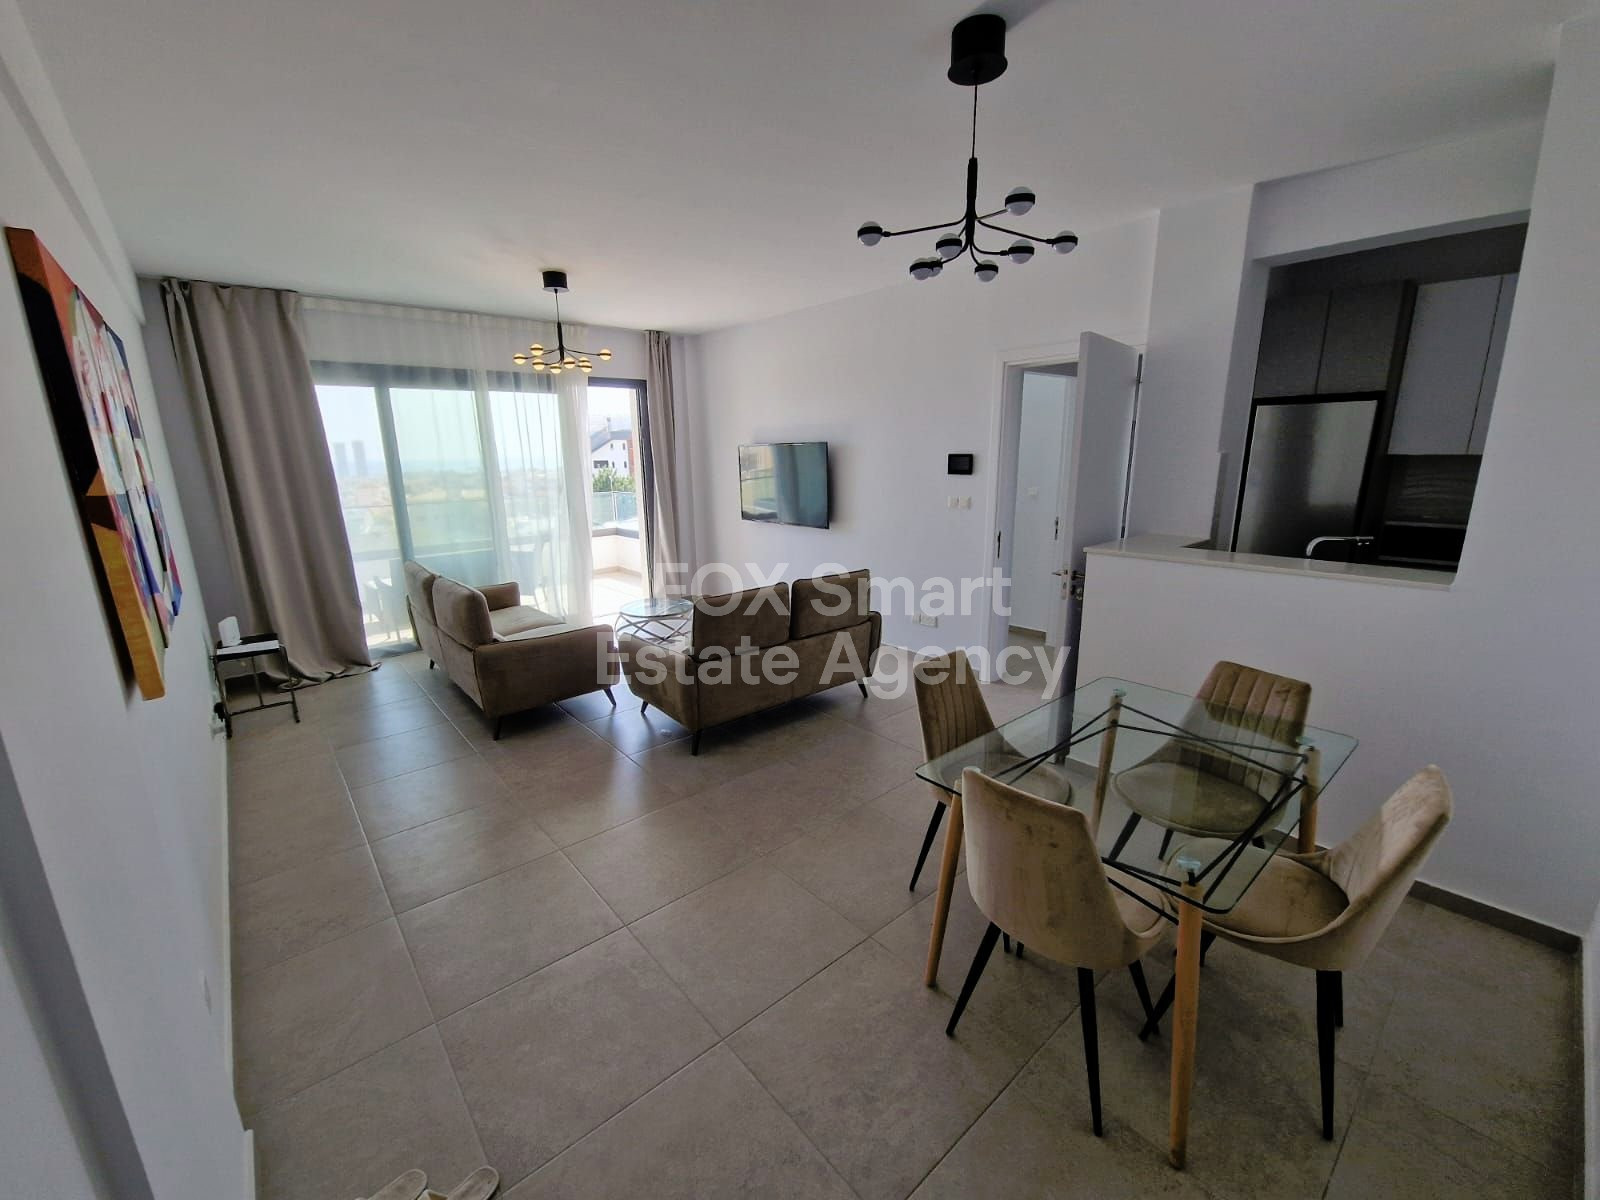 Apartment, For Sale, Limassol, Agios Athanasios  2 Bedrooms.....